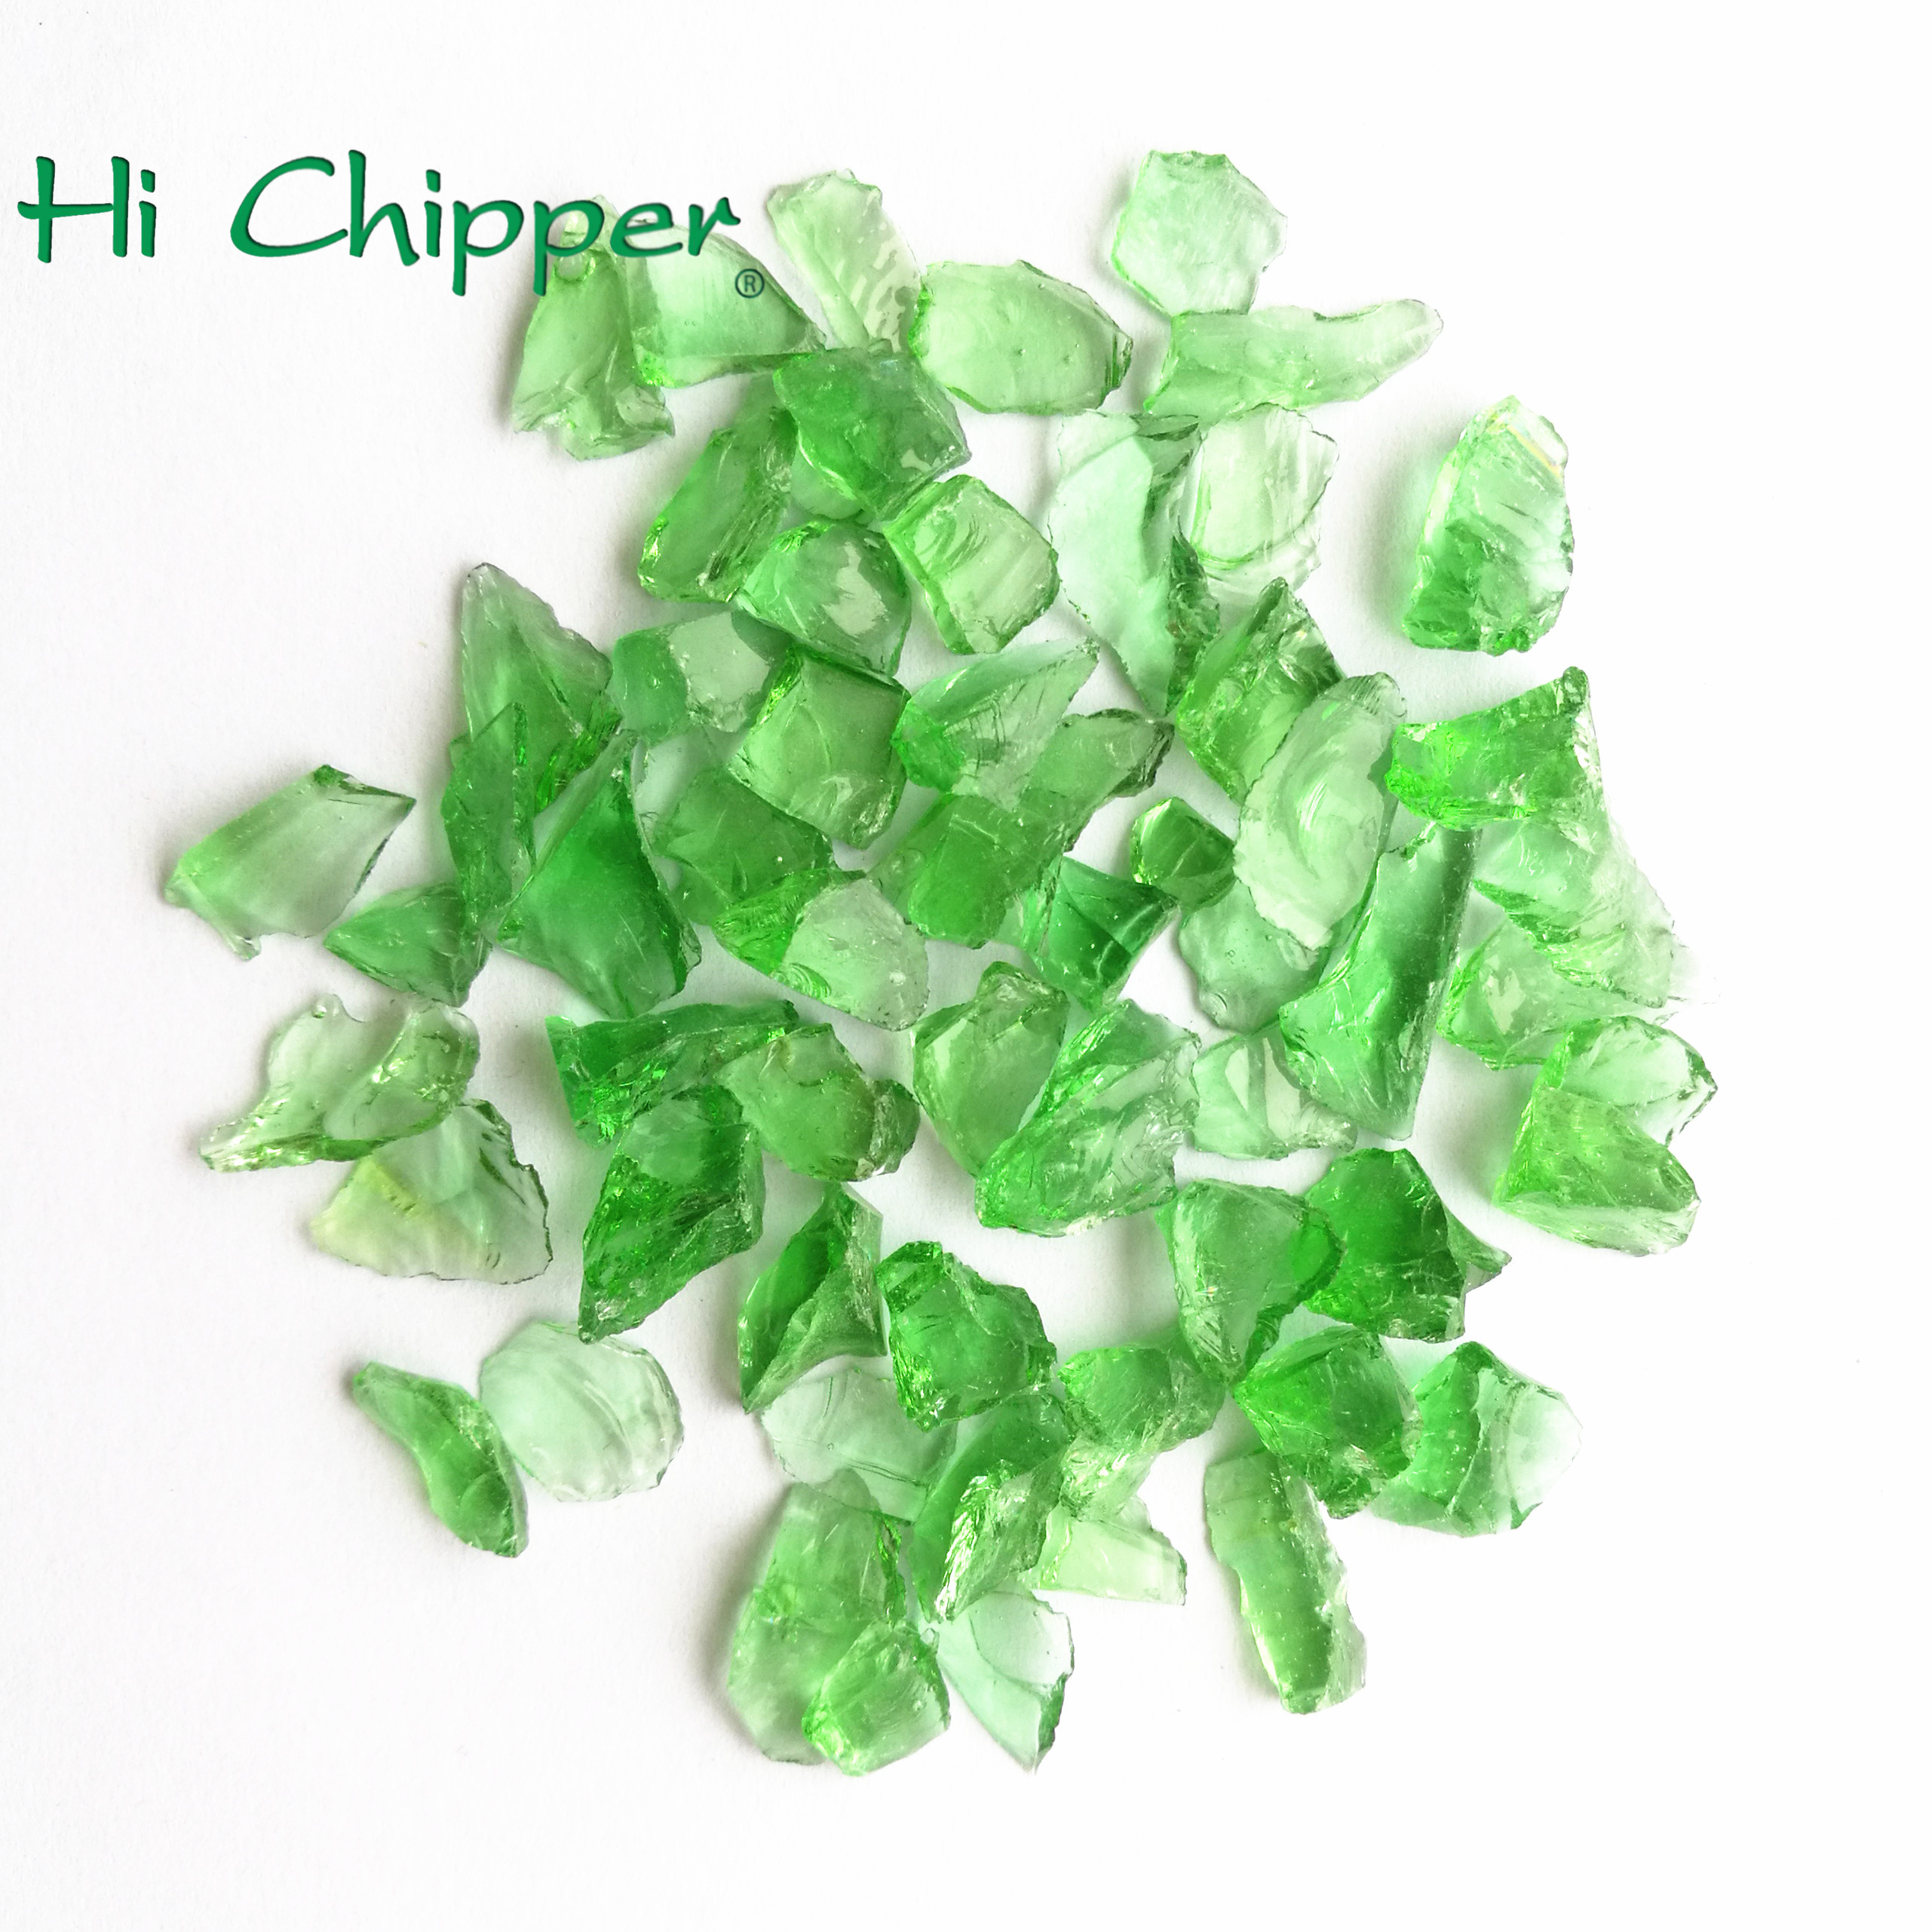 crushed green glass chipping